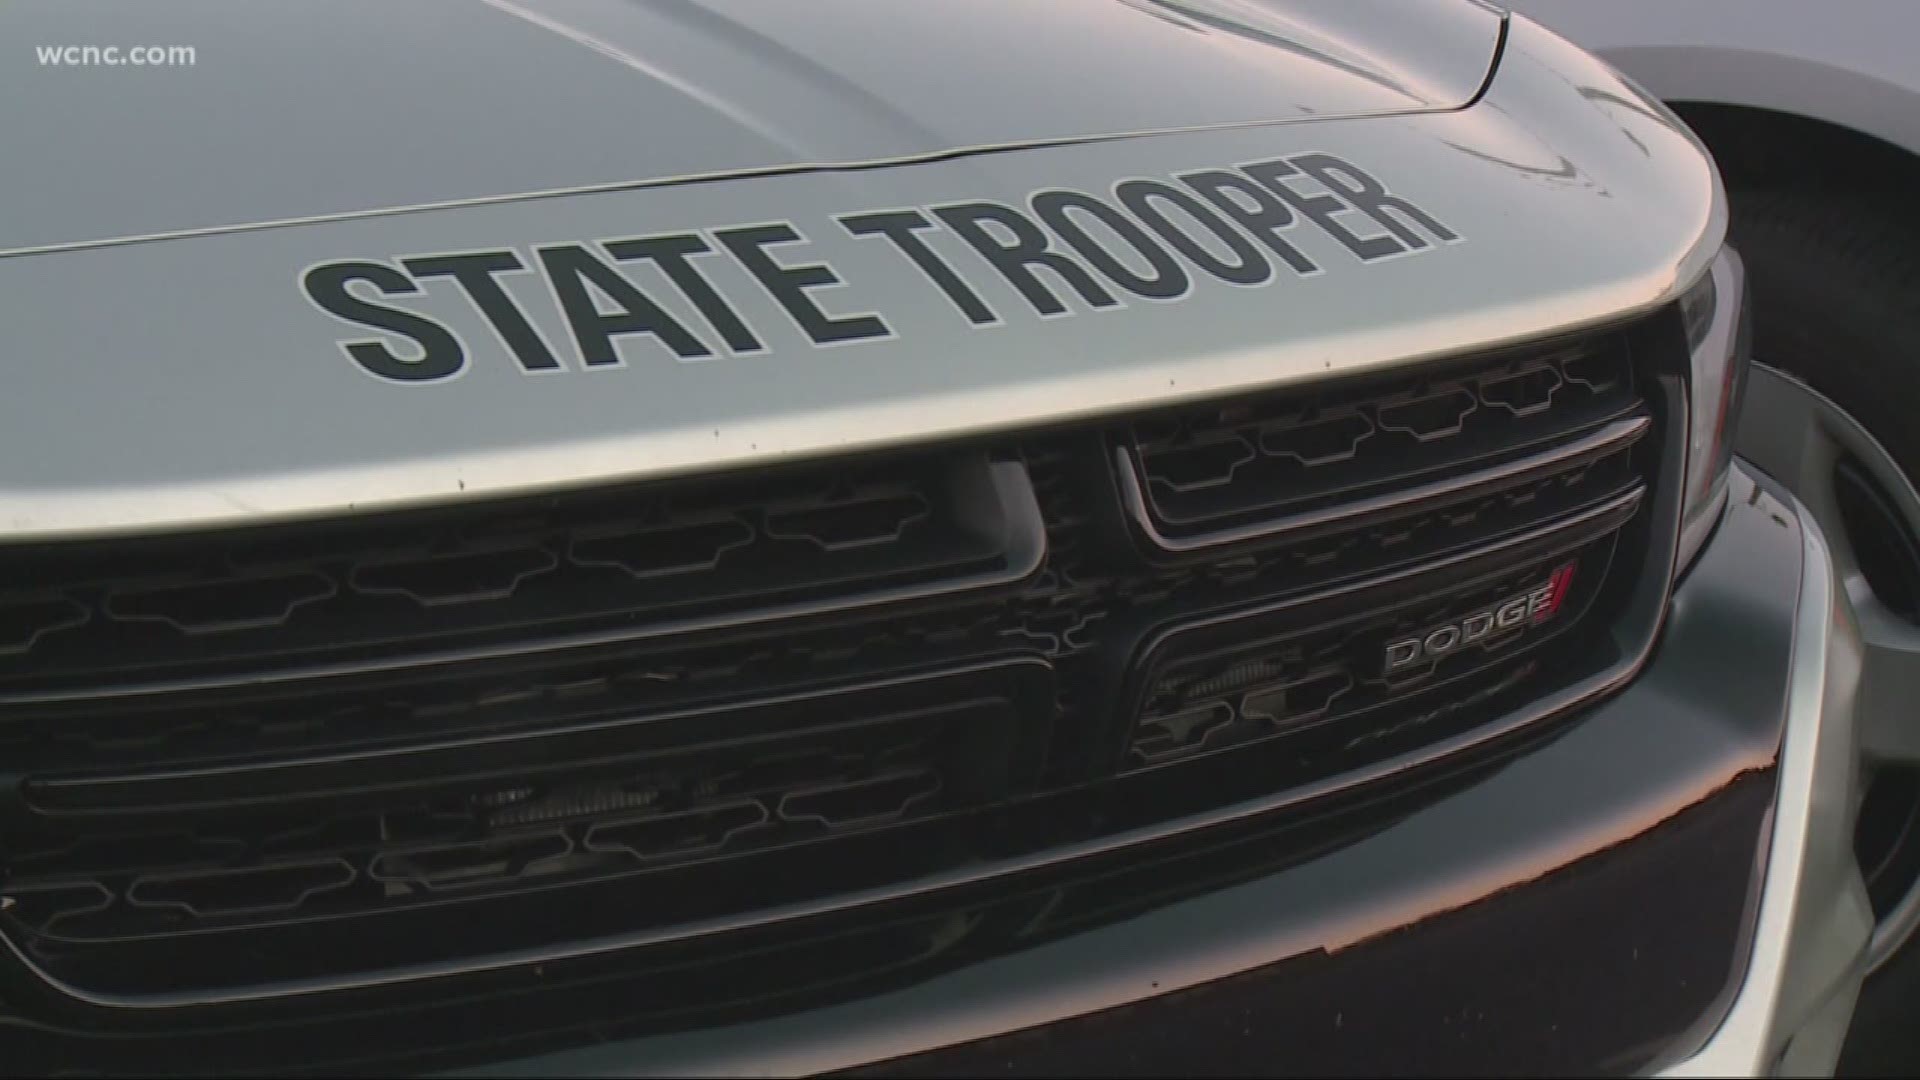 The North Carolina Highway Patrol says they will position troopers every 20 miles along I-40 as record numbers are expected to travel this holiday season.